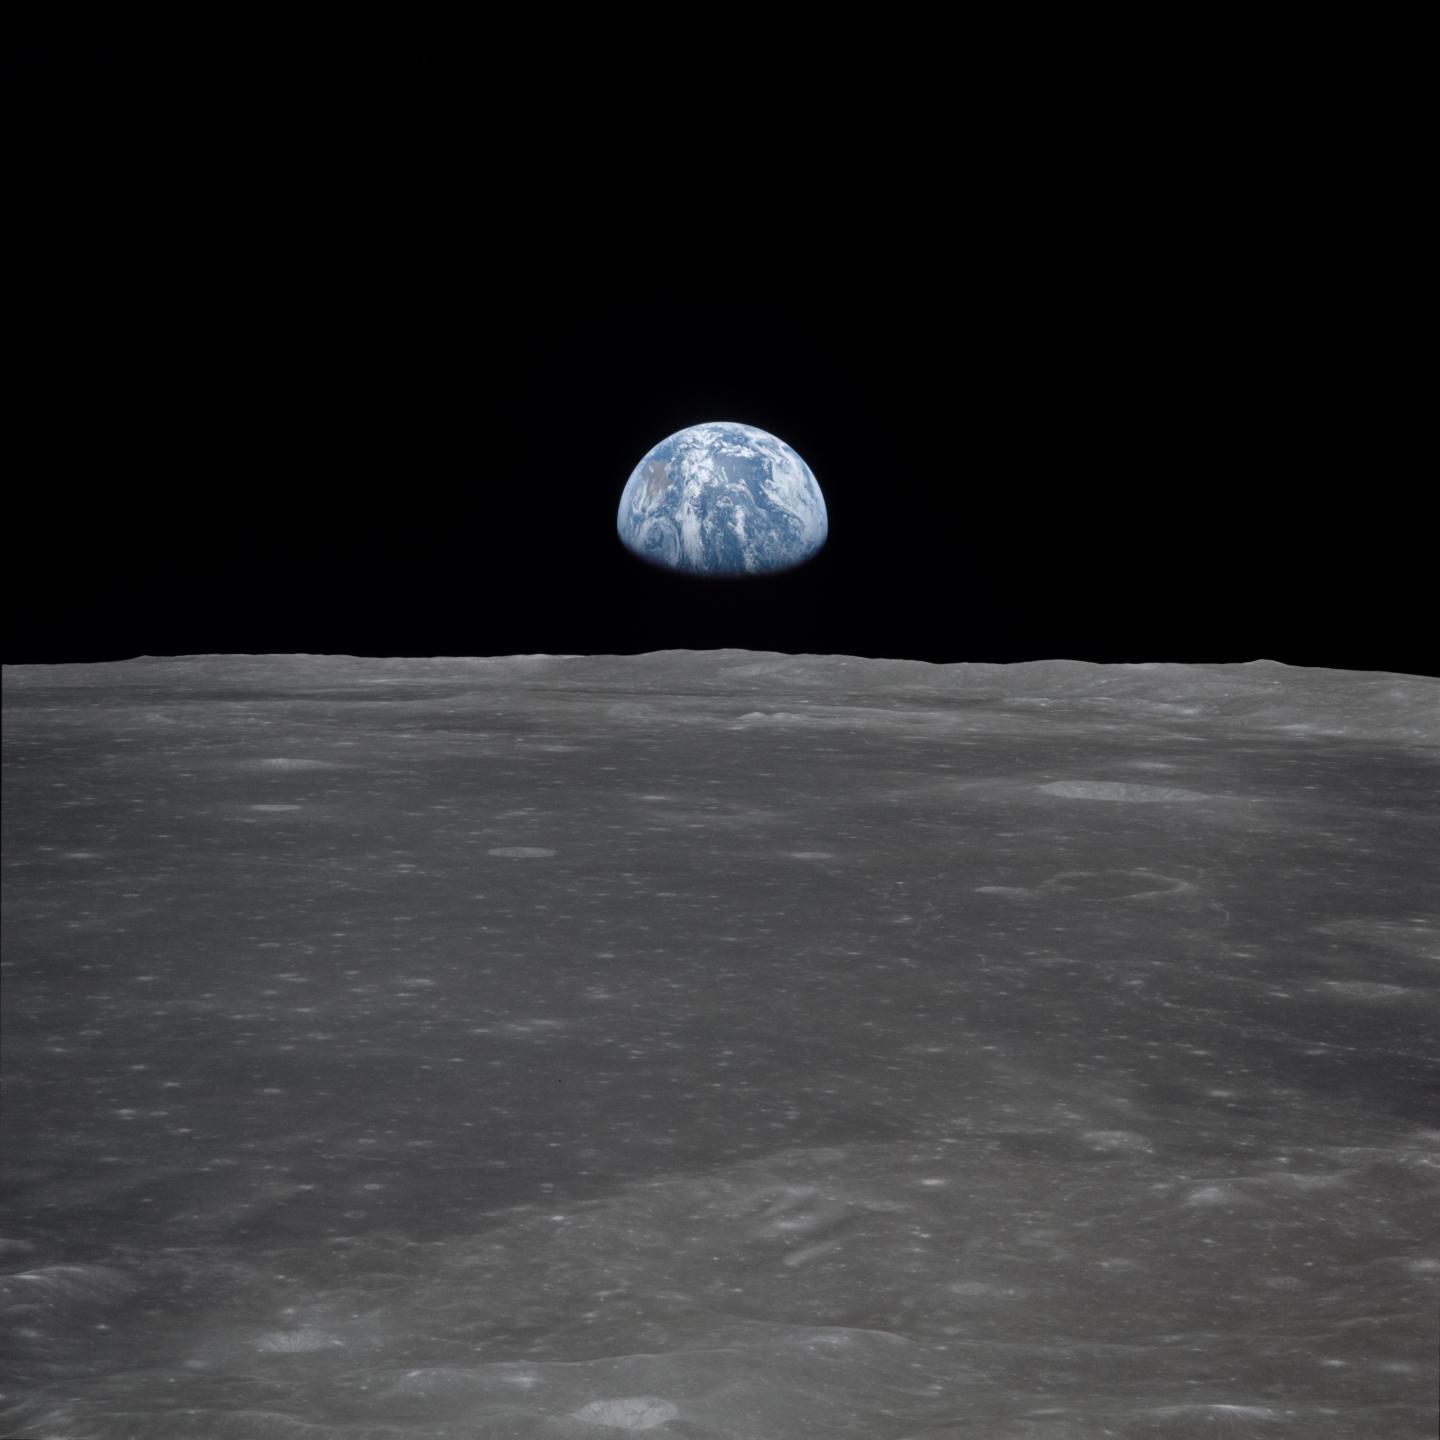 View of Moon Limb, with Earth on the Horizon